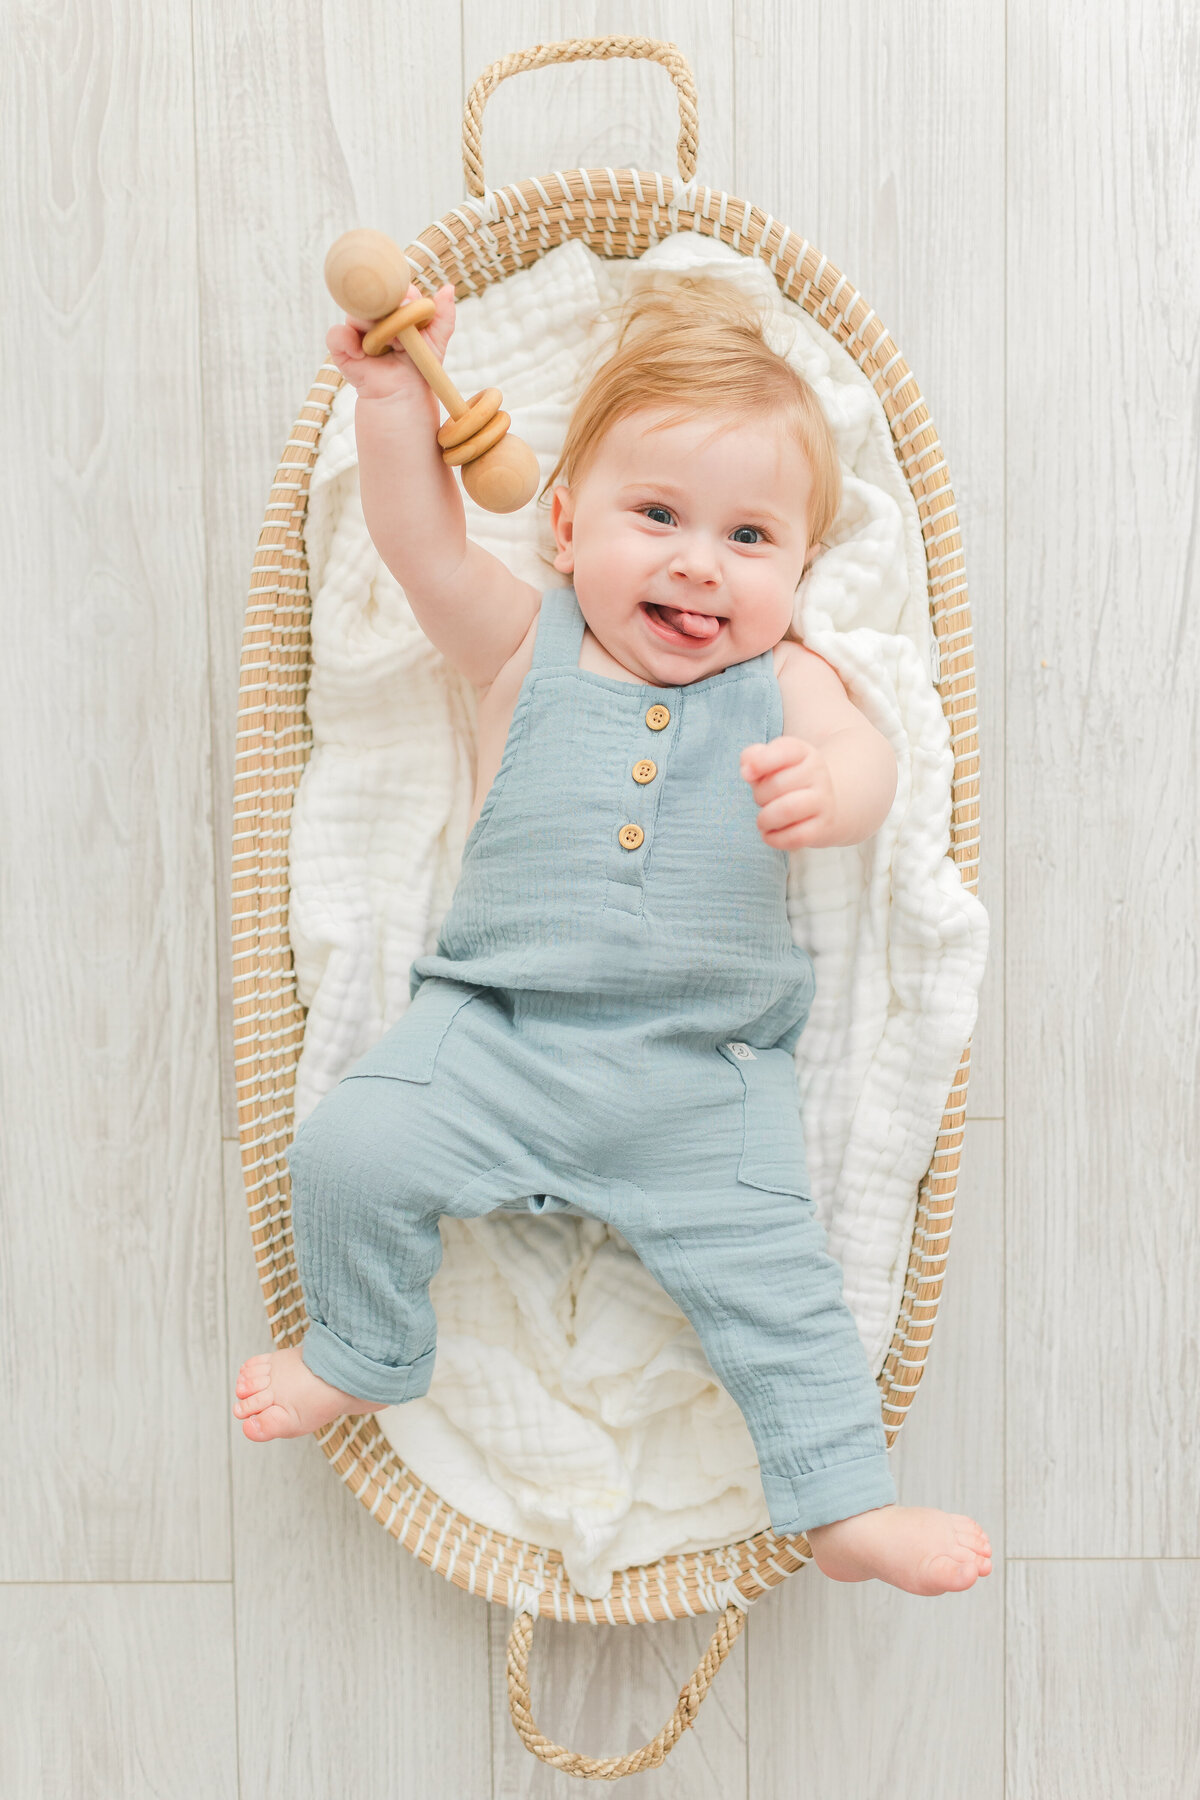 A Baby Photography photo in Northern Virginia of a baby holding a rattle in a basket on the floor